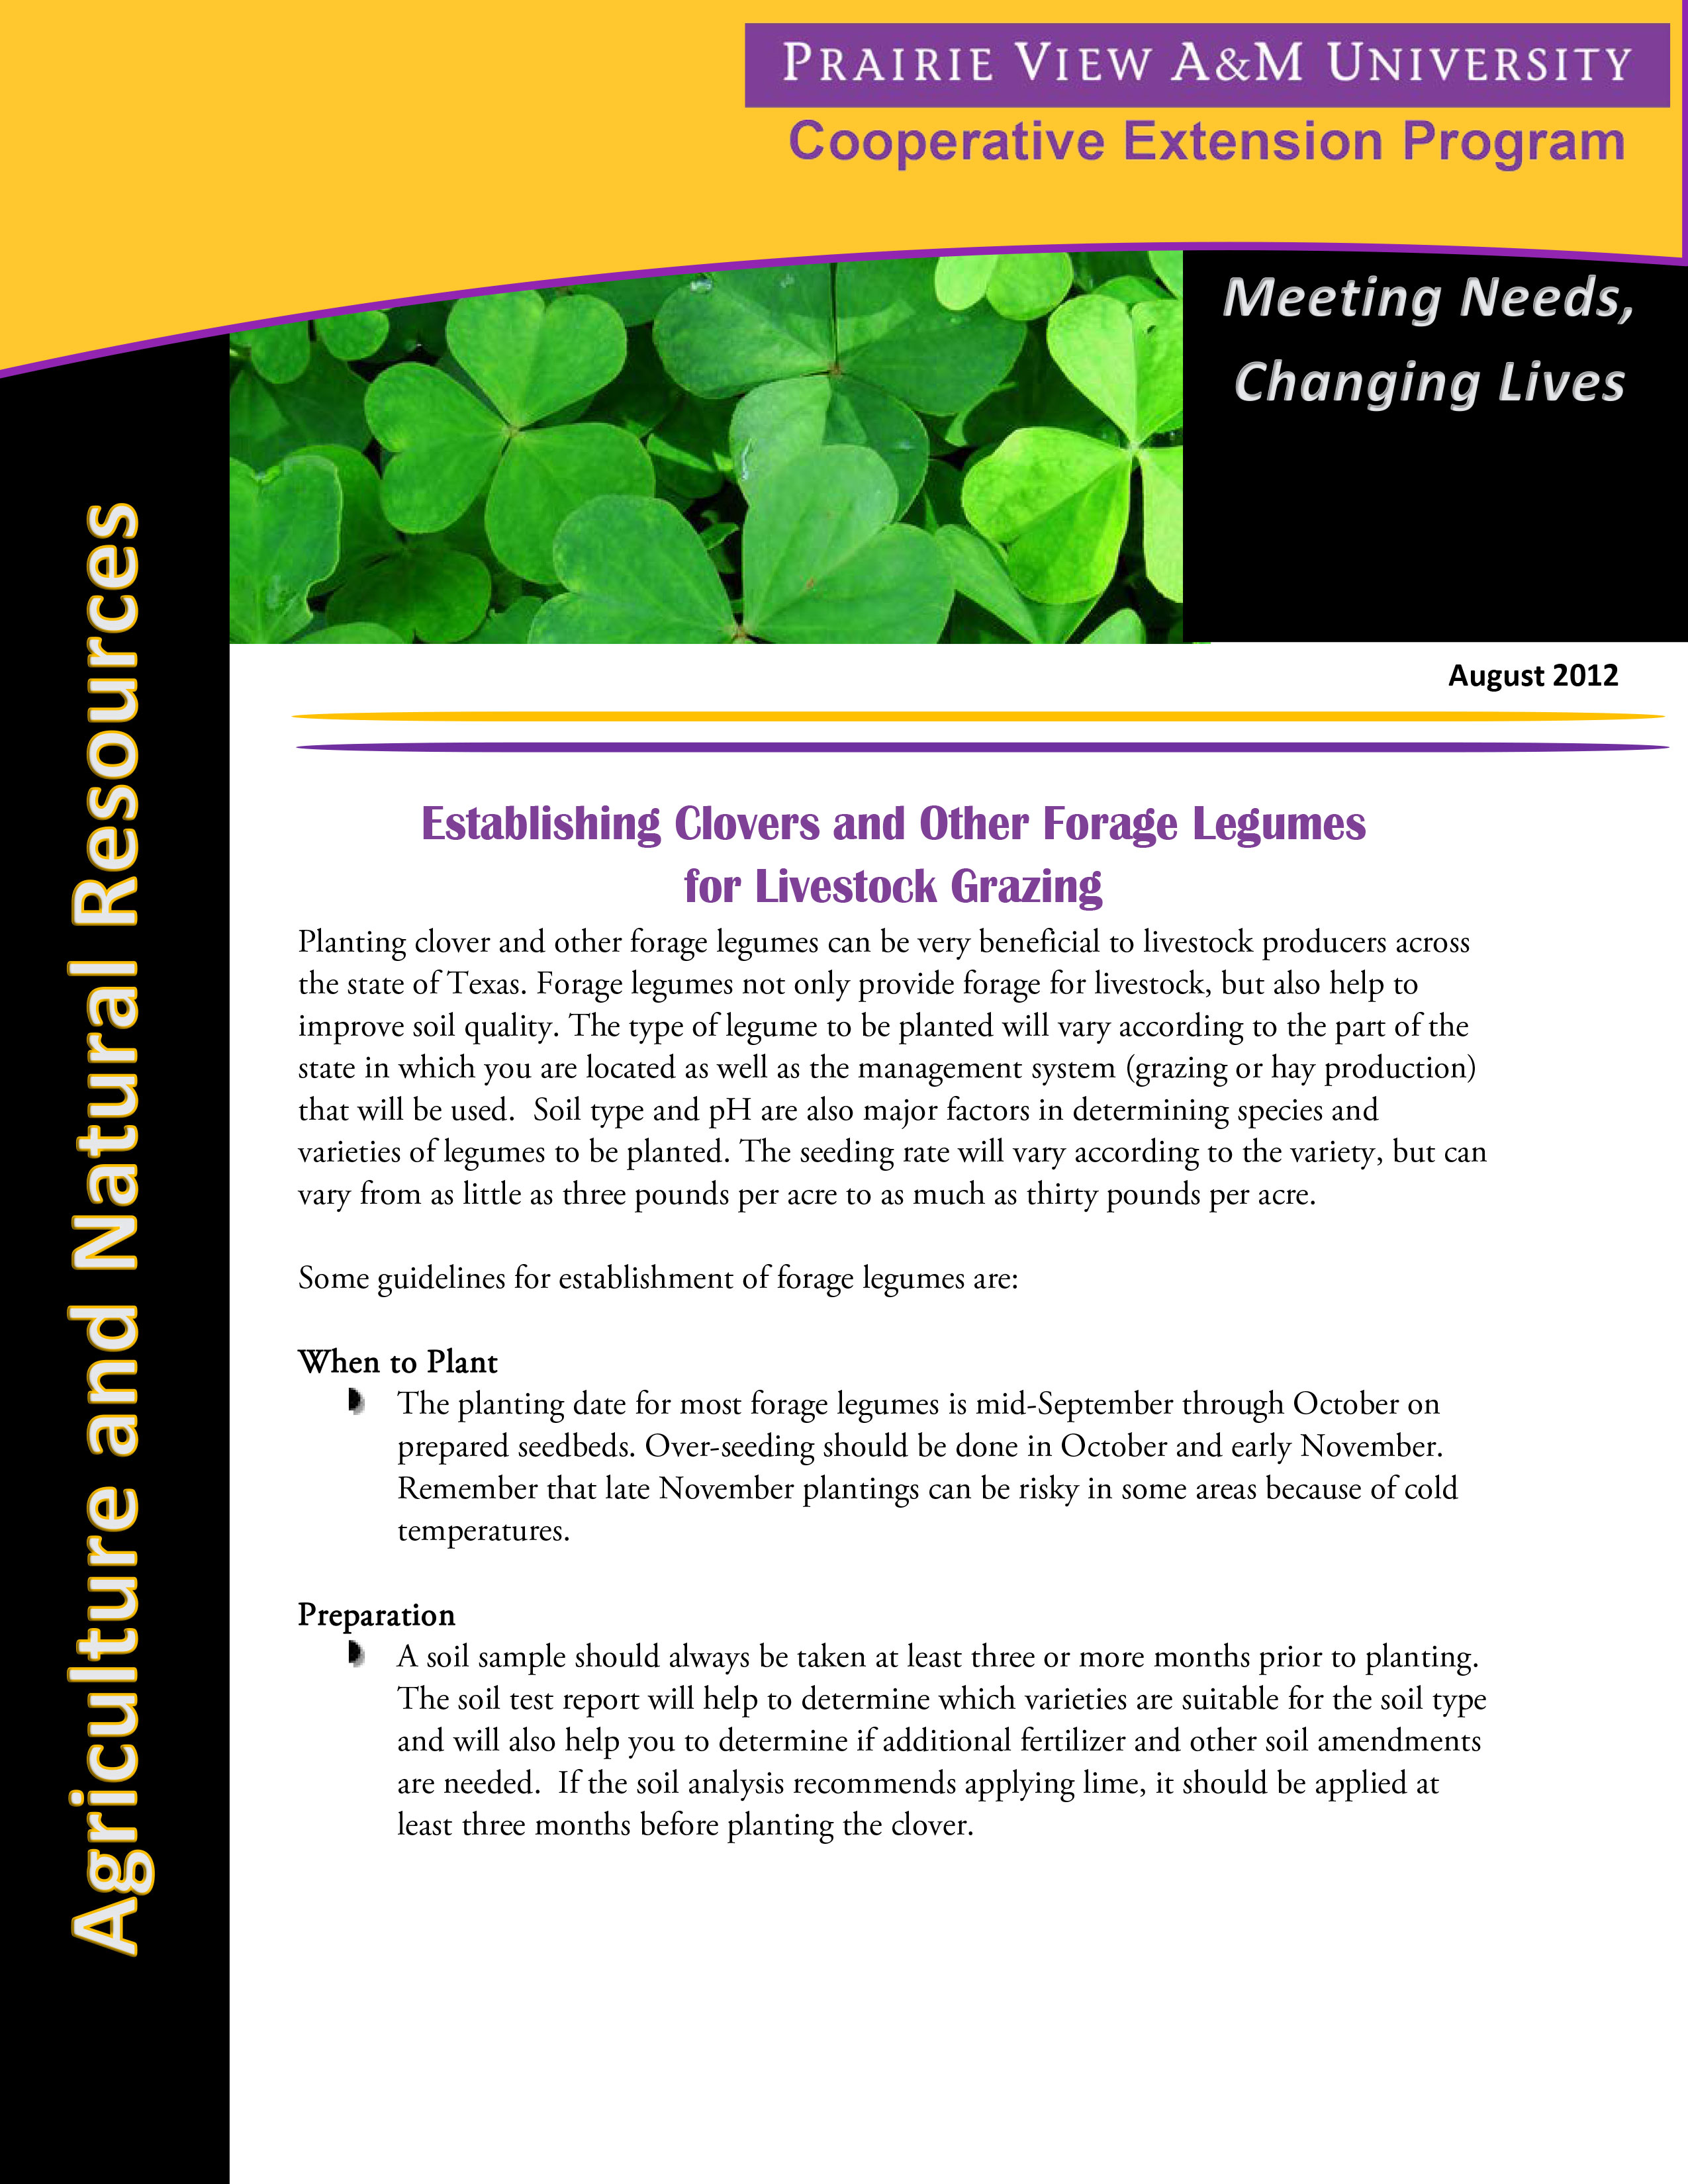 Establishing Clovers and Other Forage Legumes for Livestock Grazing